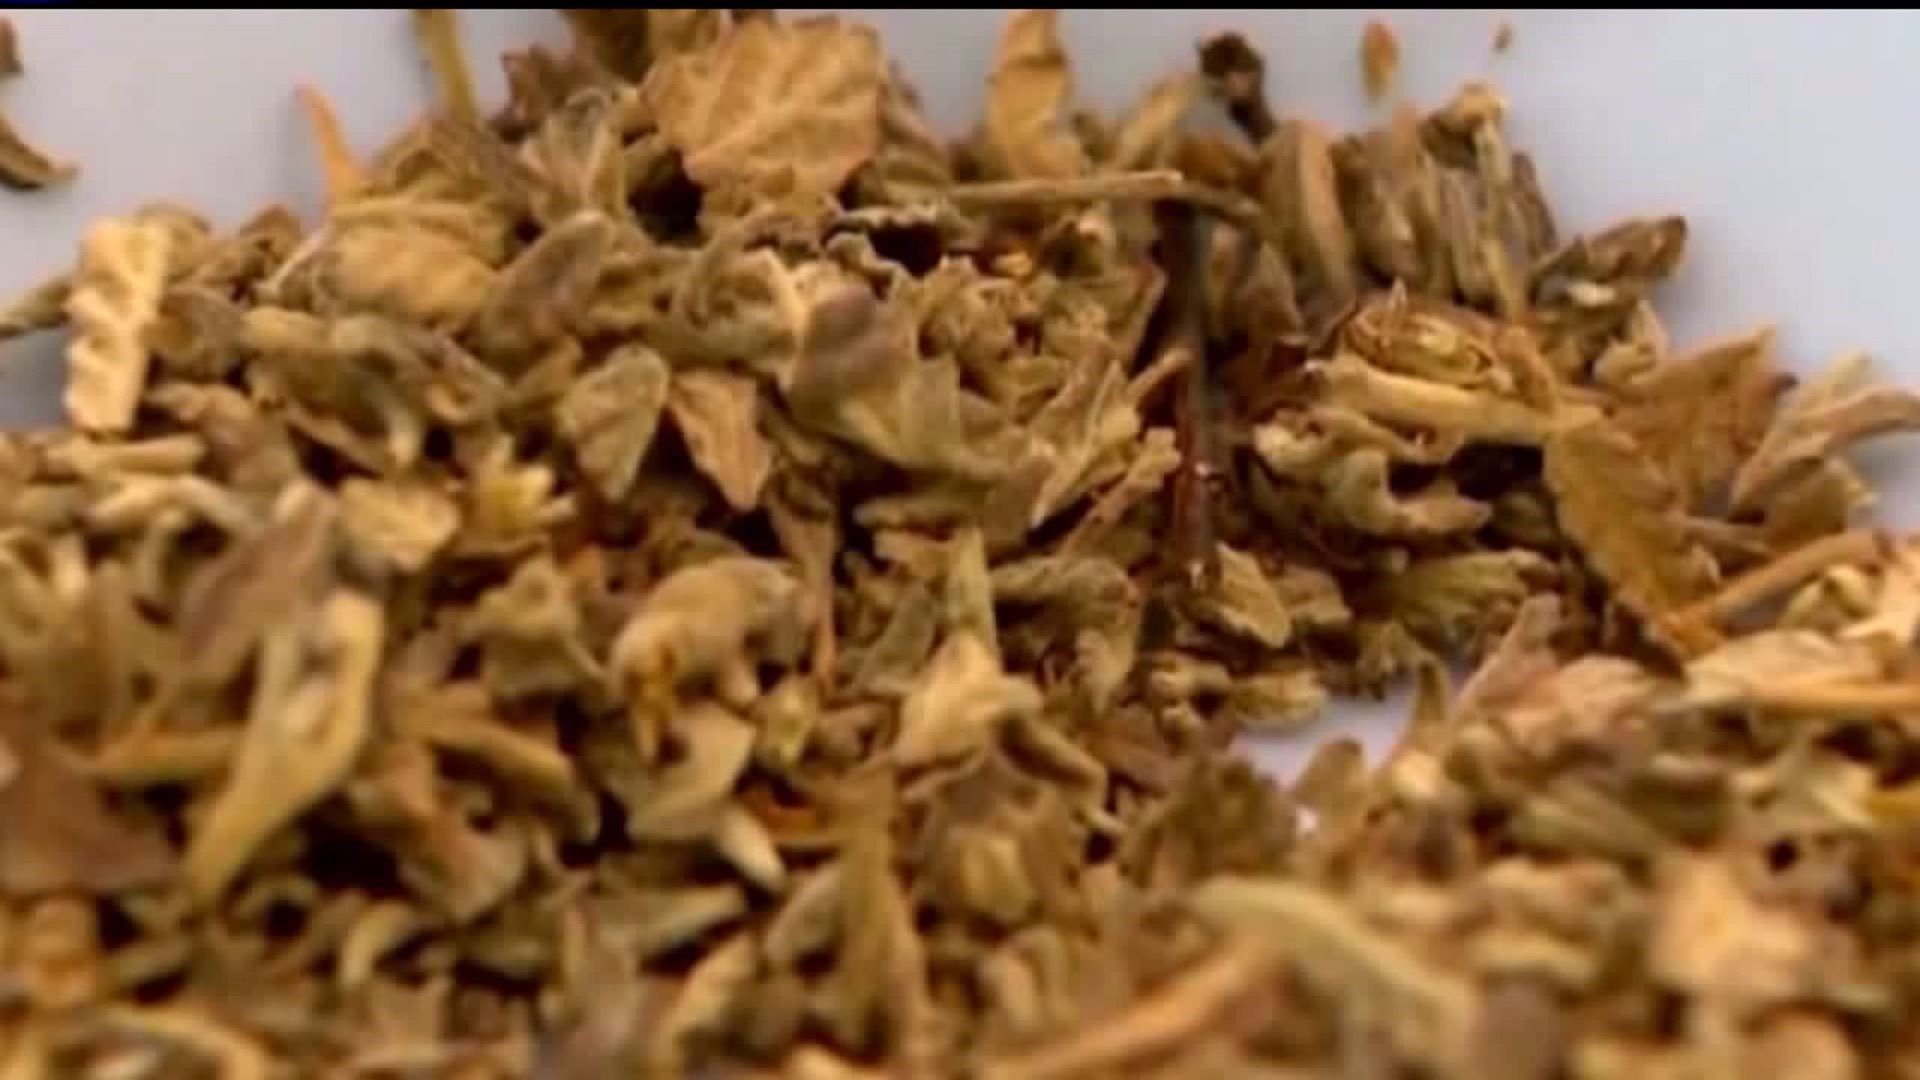 Fake pot laced with rat poison killing people in Illinois